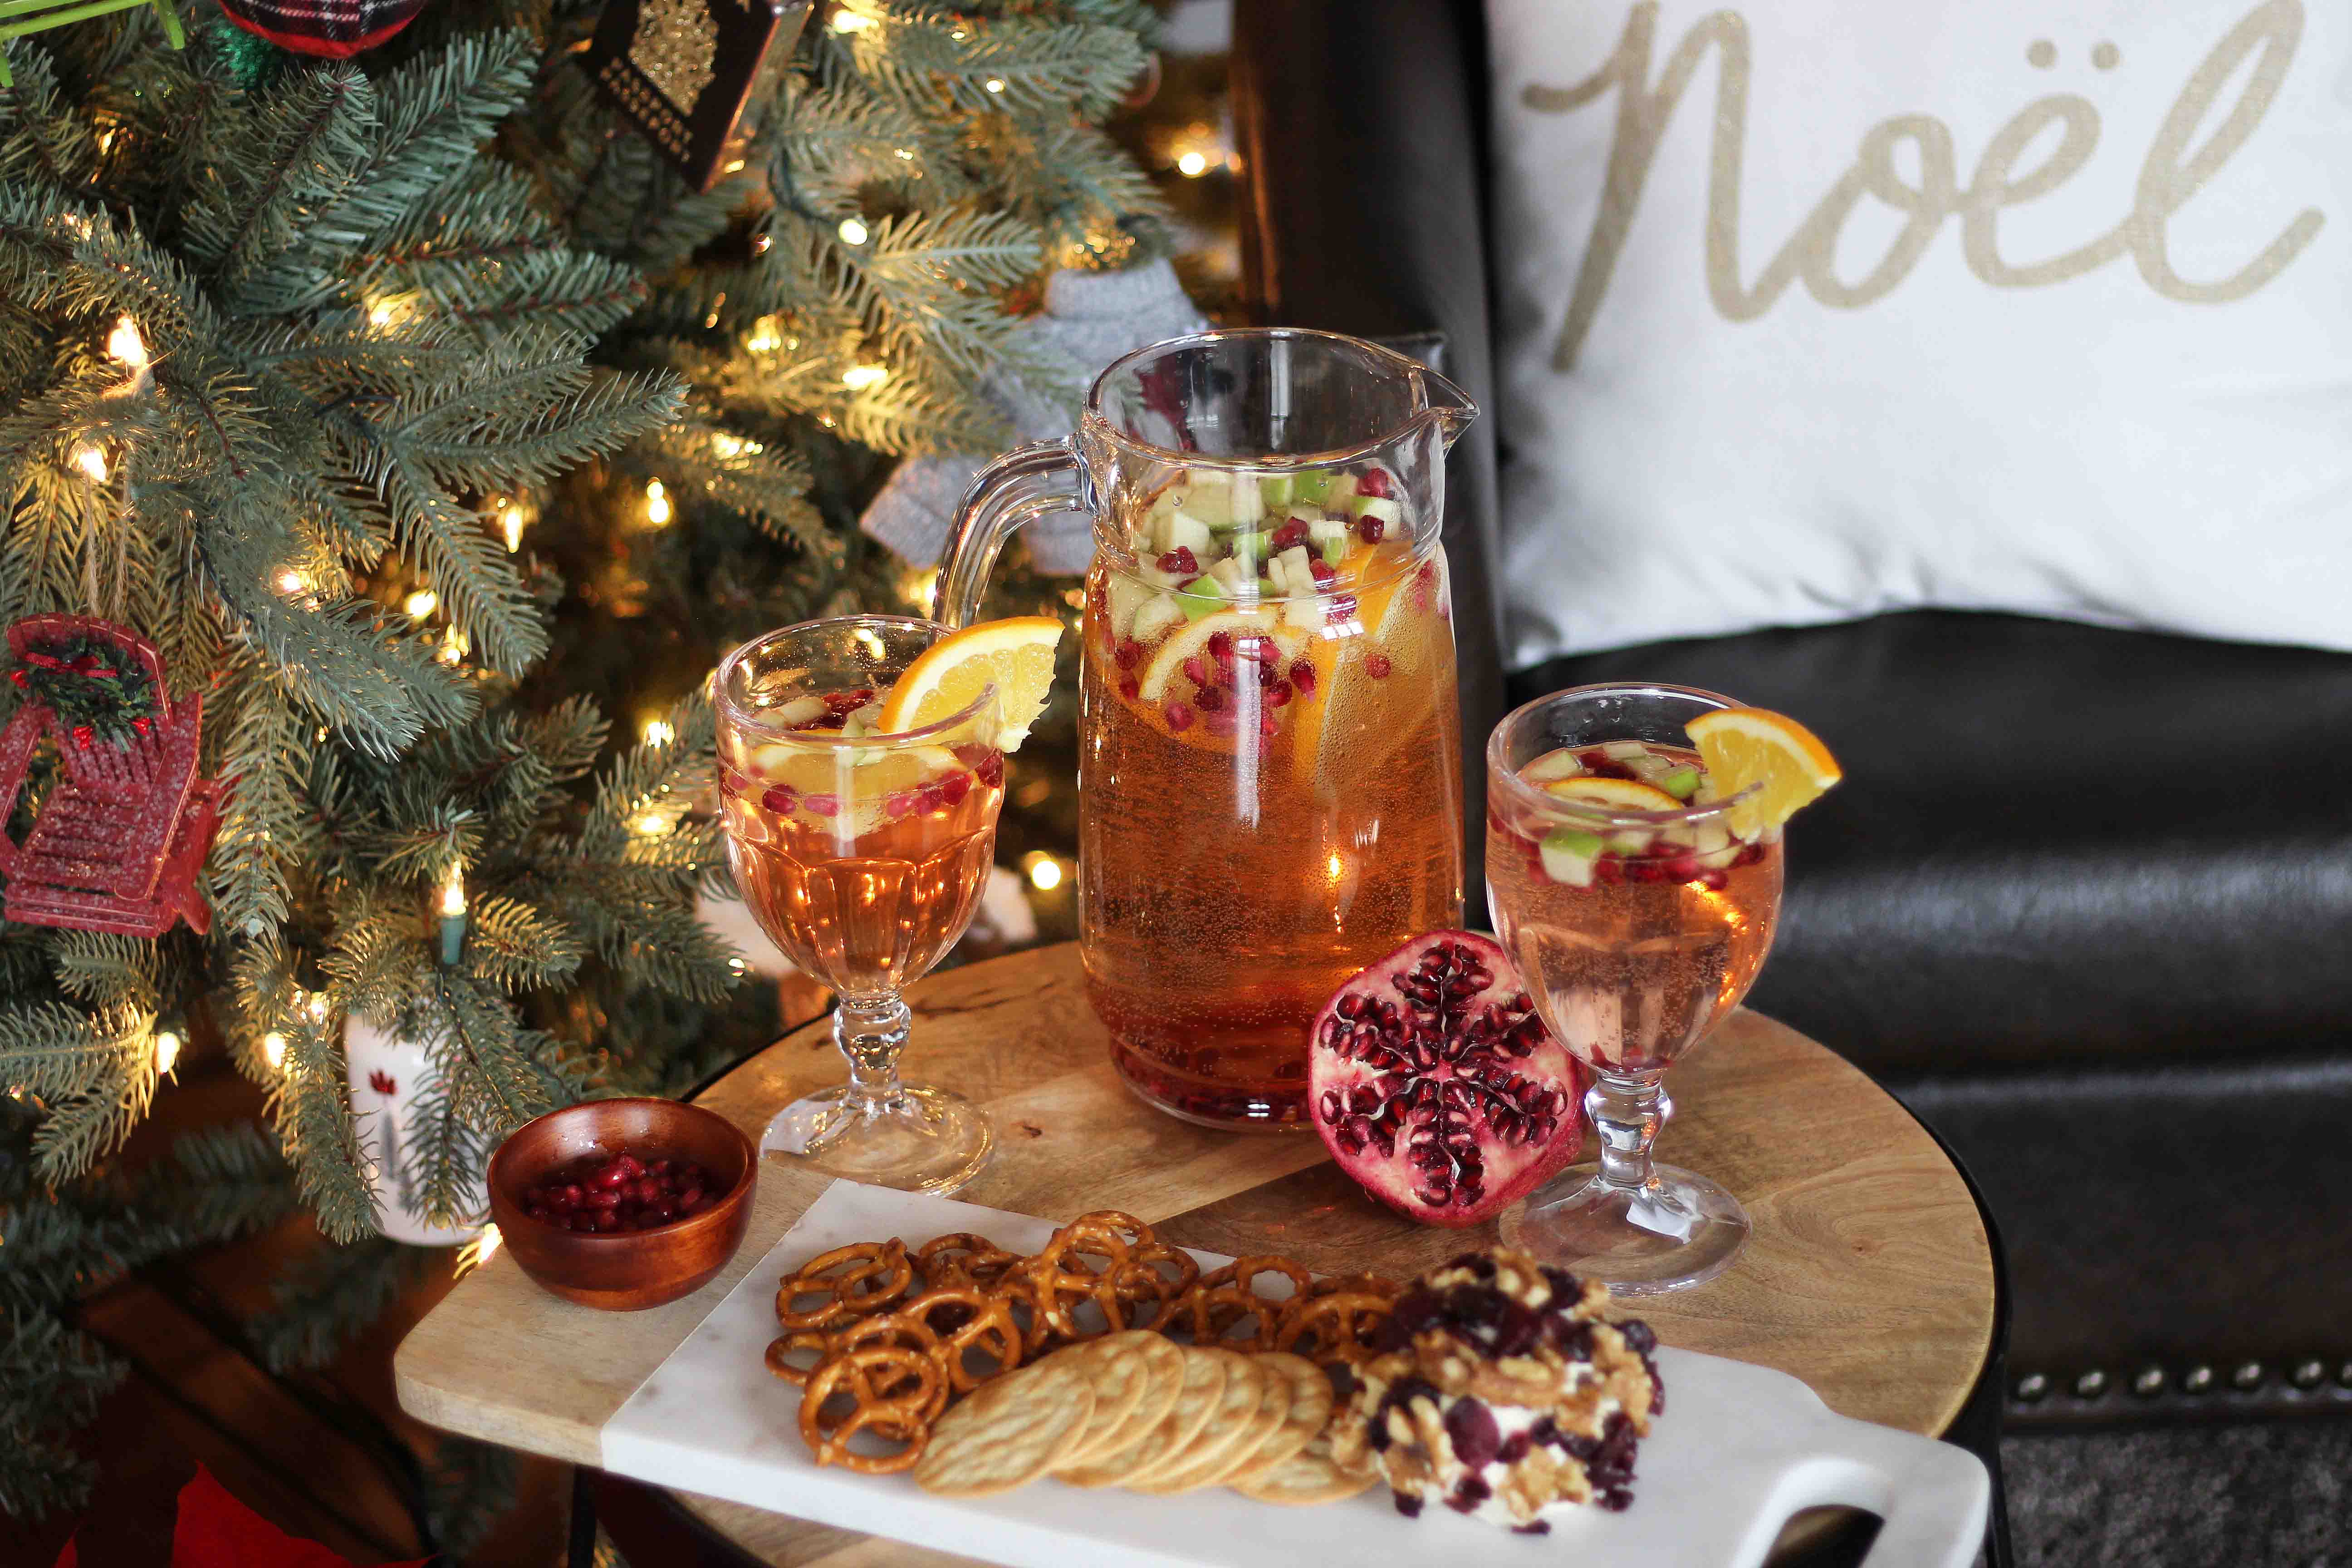 Canada Dry sangria drink ideas with holiday cheeseball